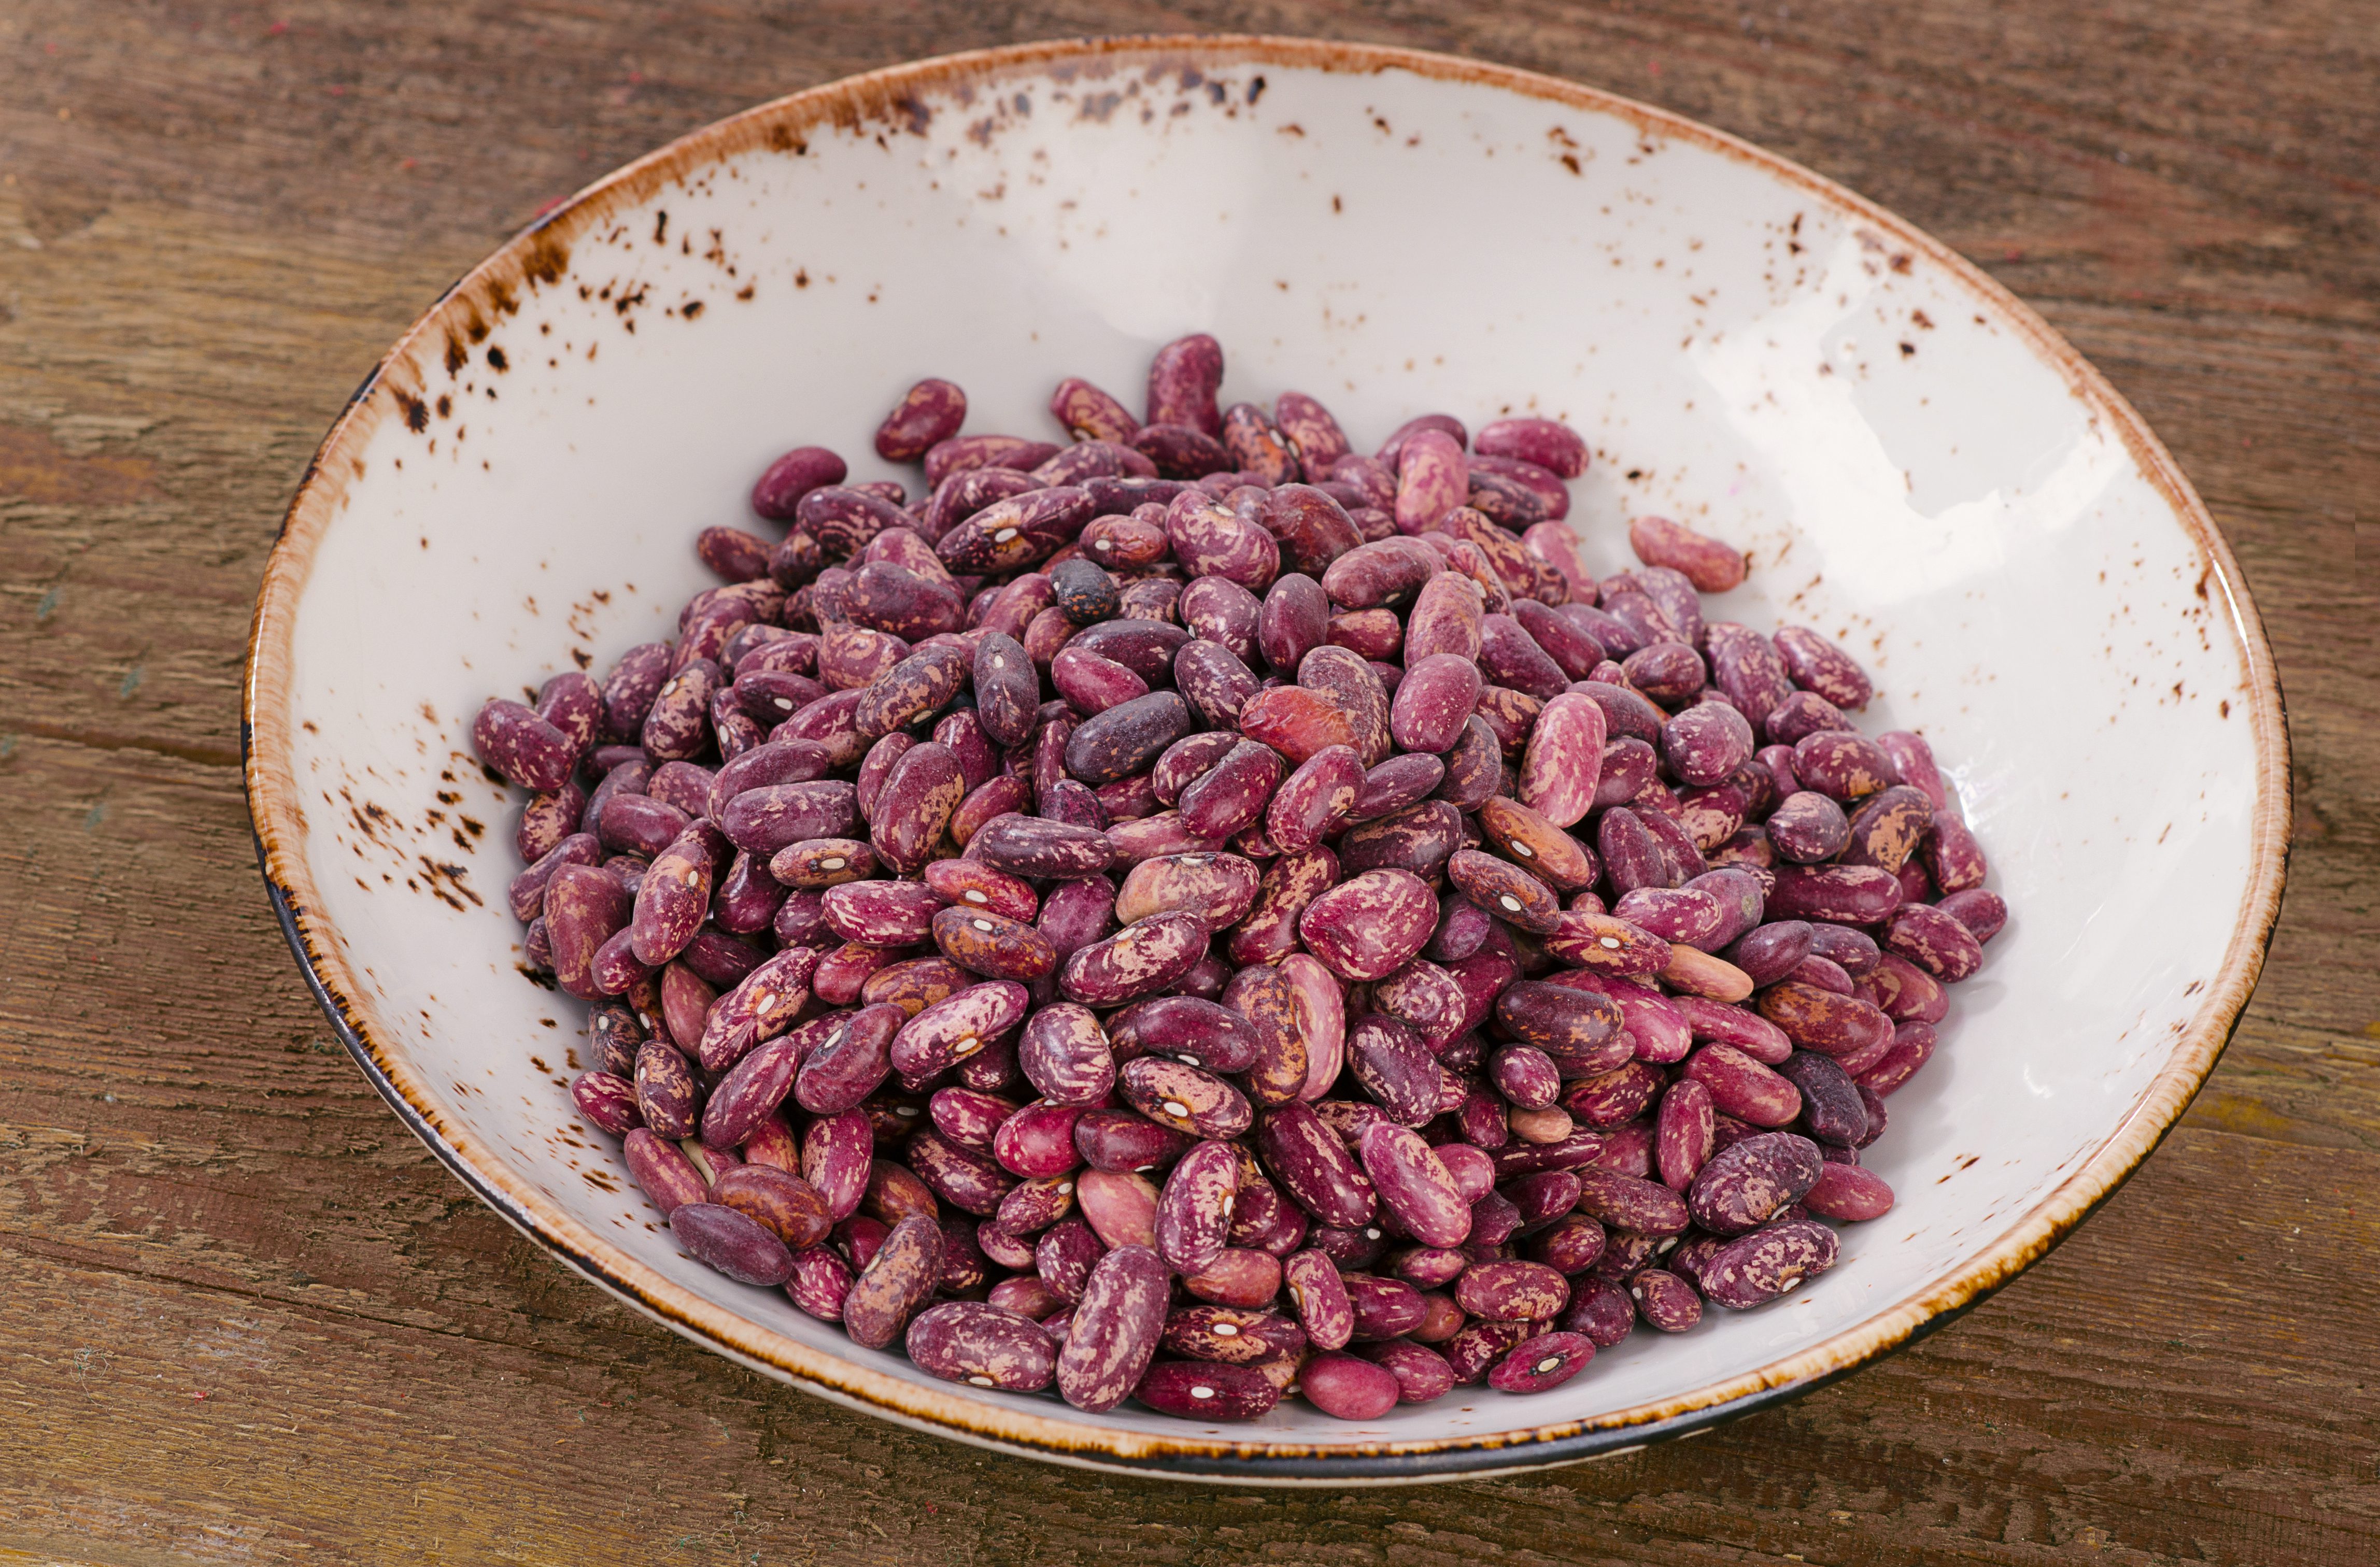 buying dry beans can help save money if you're plant-based on a budget